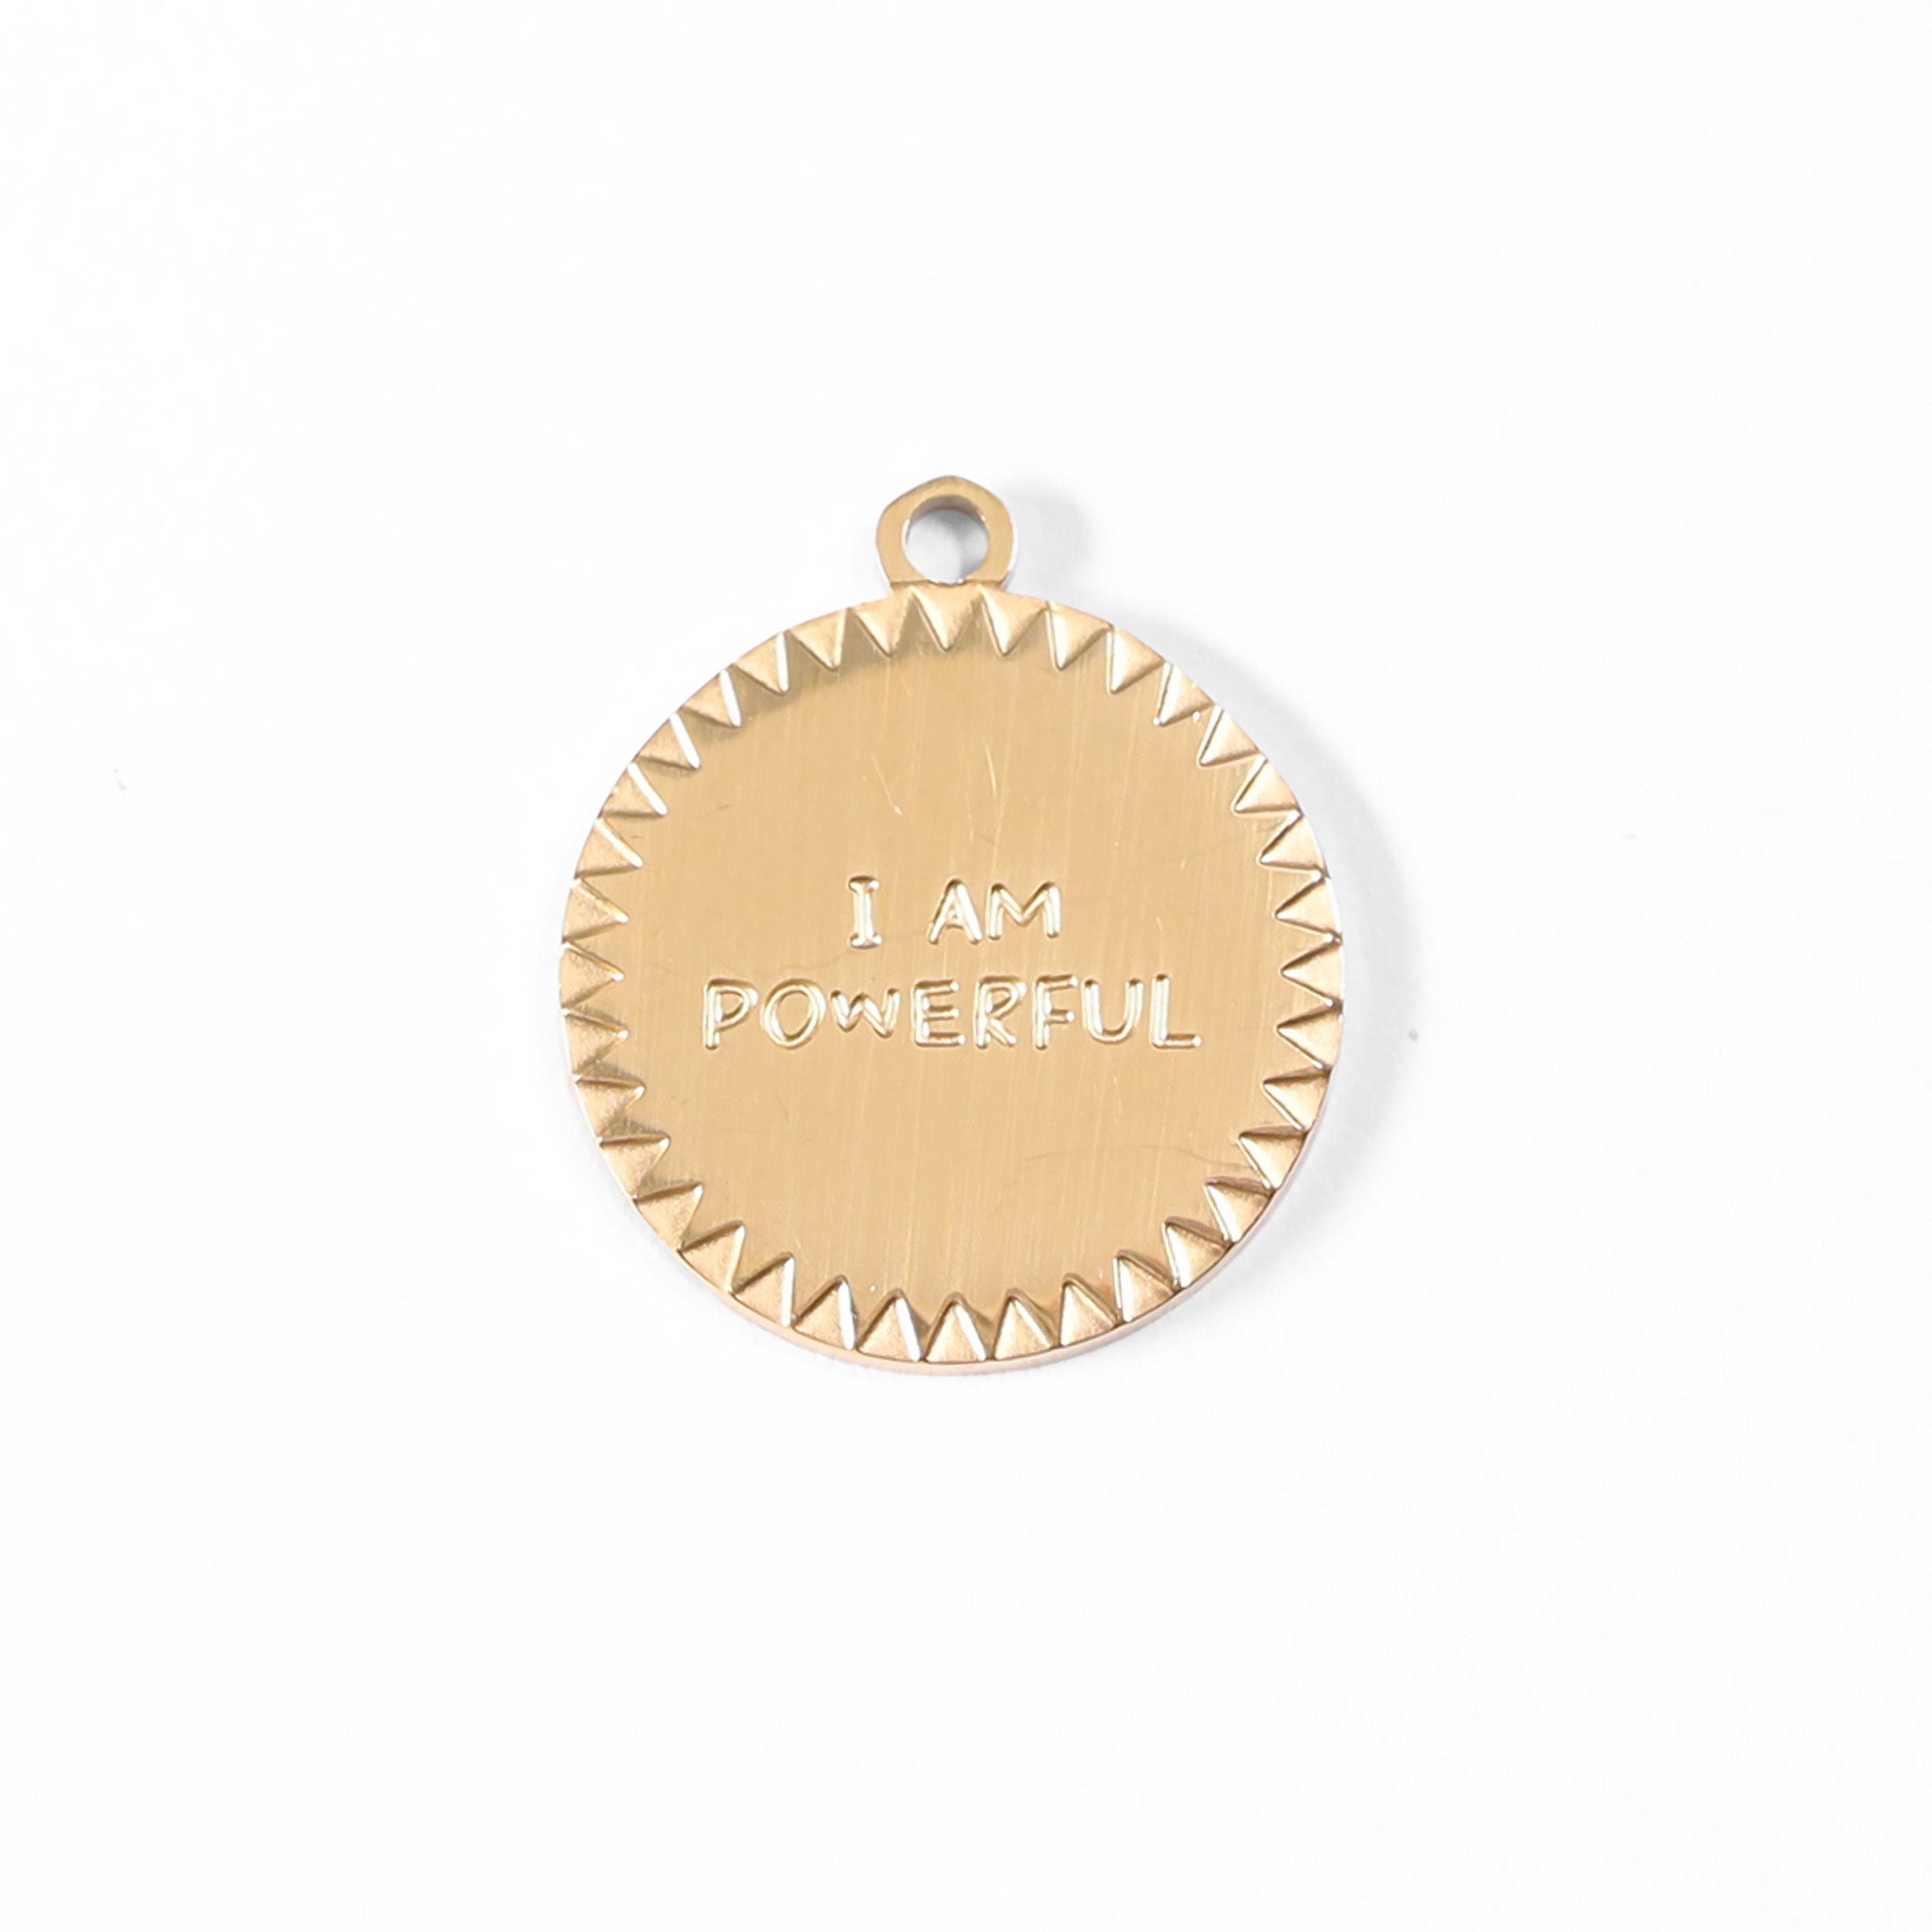 18K Gold PVD Stainless Steel "I Am Powerful" Charm / PDL0015